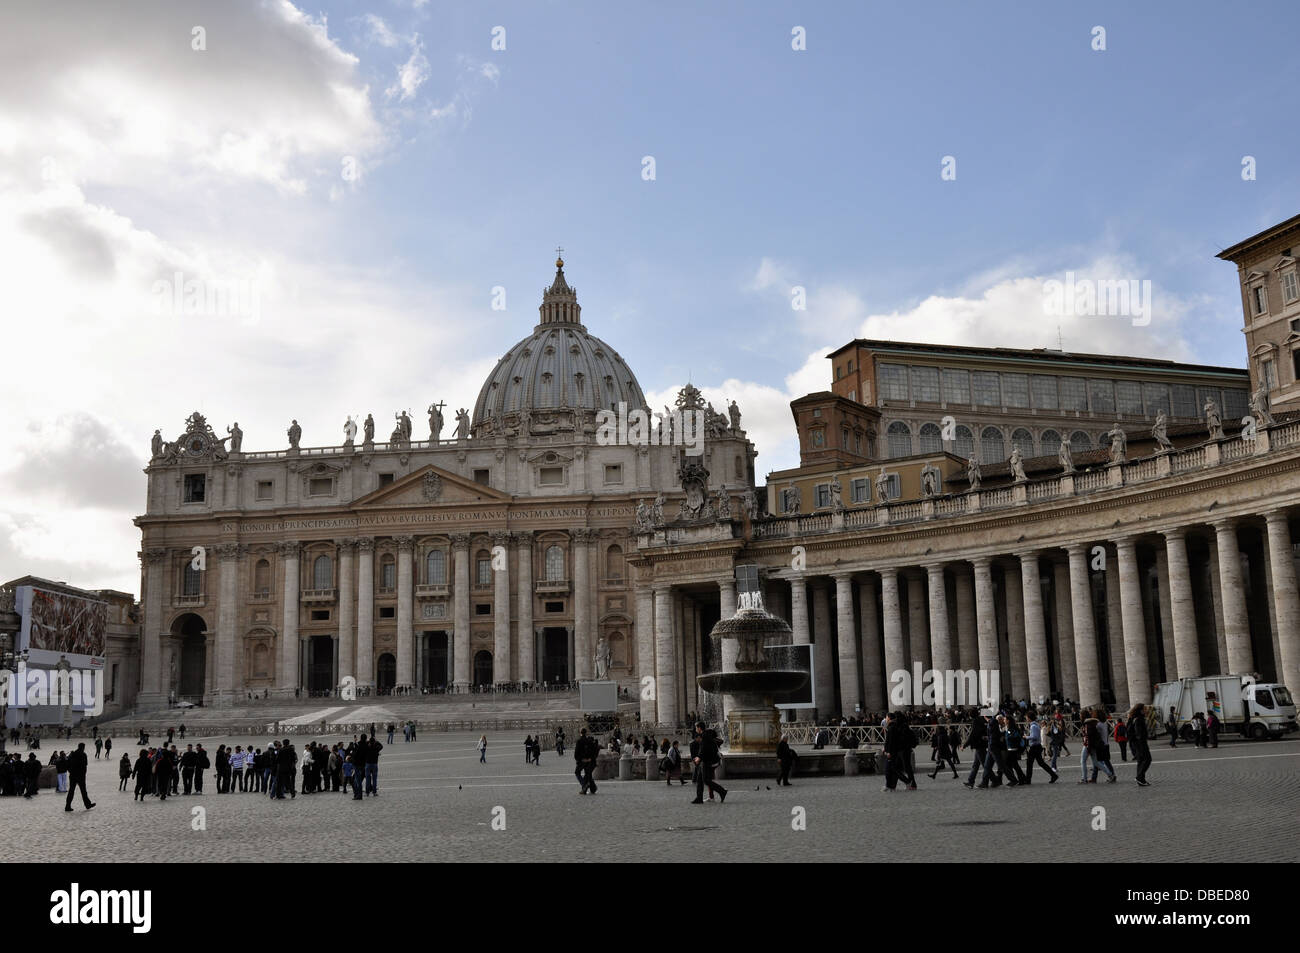 St Peter's Basilica with Bernini's colonnade and Maderno's fountain in Rome. Stock Photo